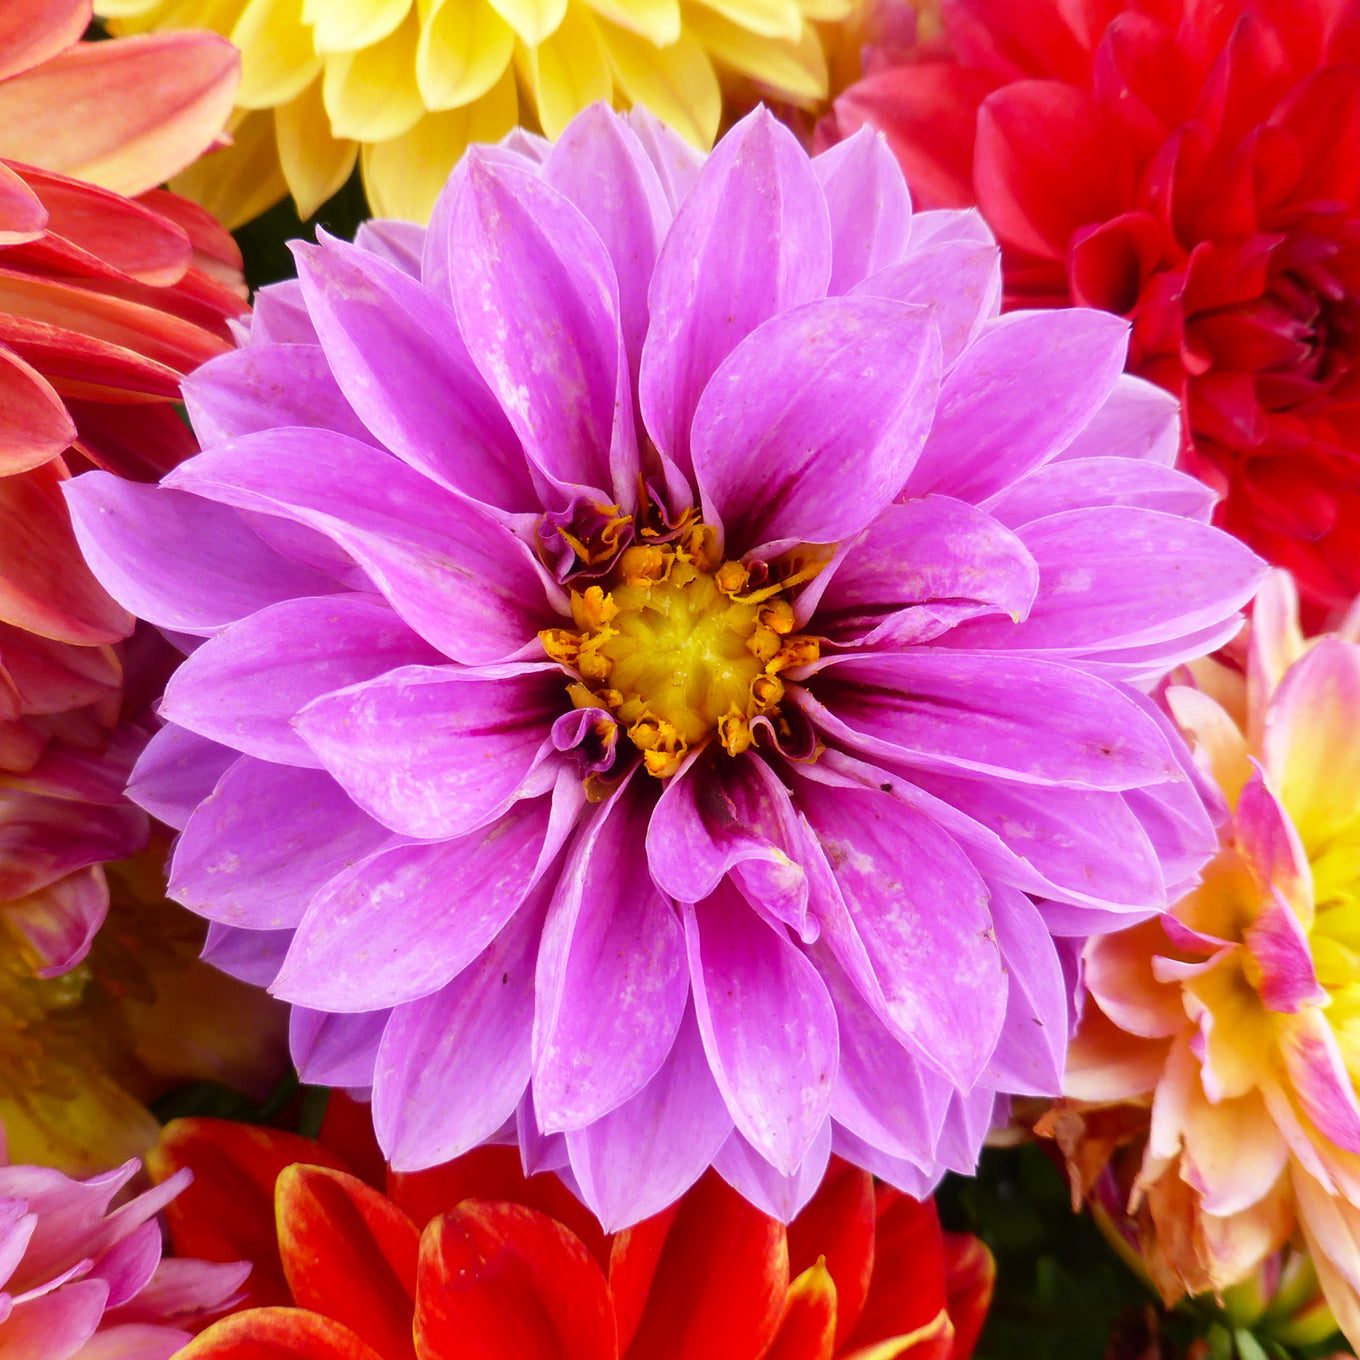 Unwin's Dwarf Mixed Colors Dahlia Flower seeds, picture shows beautifully blooming dahlia amongst other vibrant dahlias.